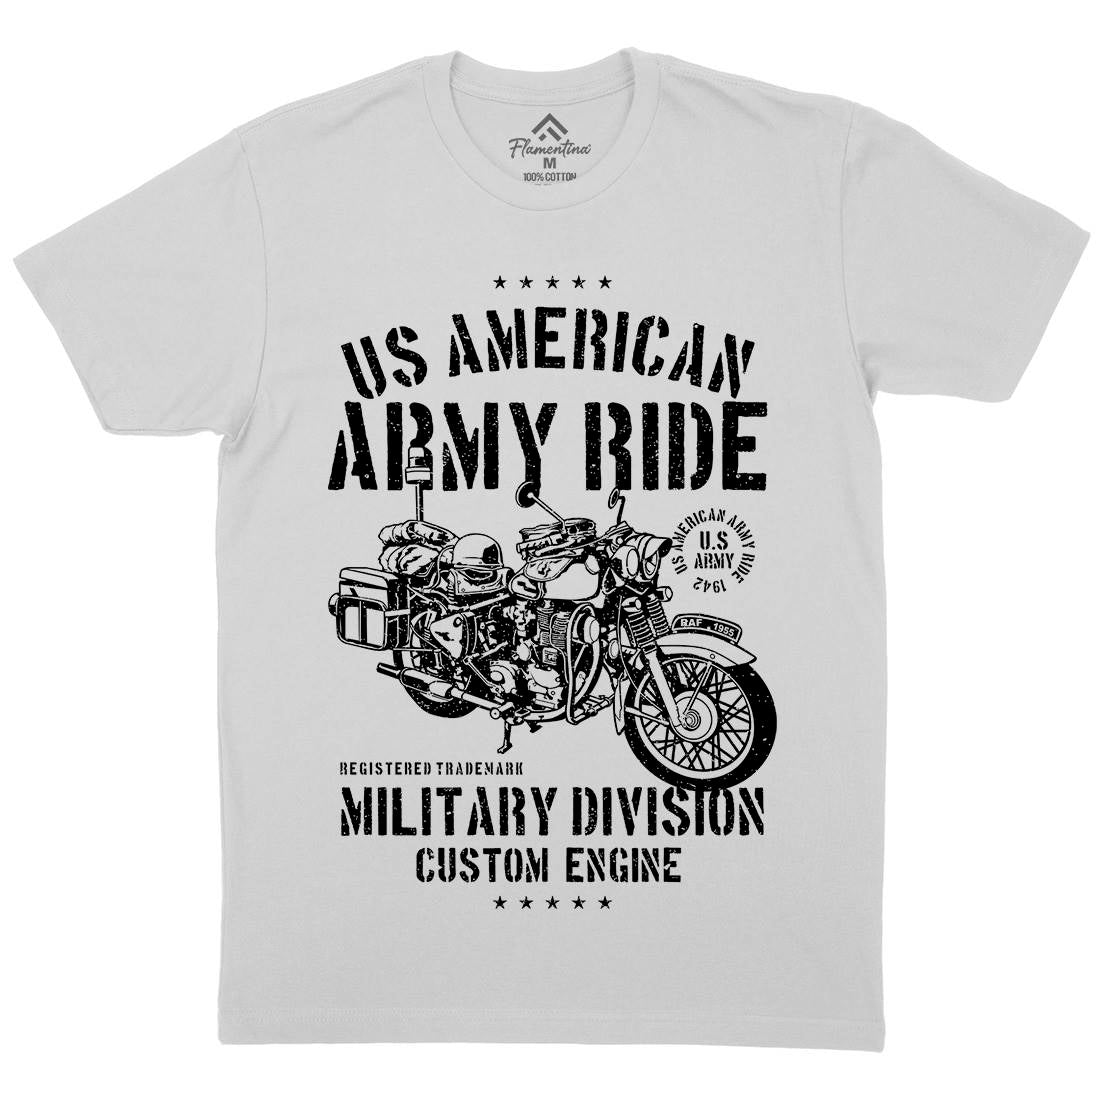 Ride Mens Crew Neck T-Shirt Army A613